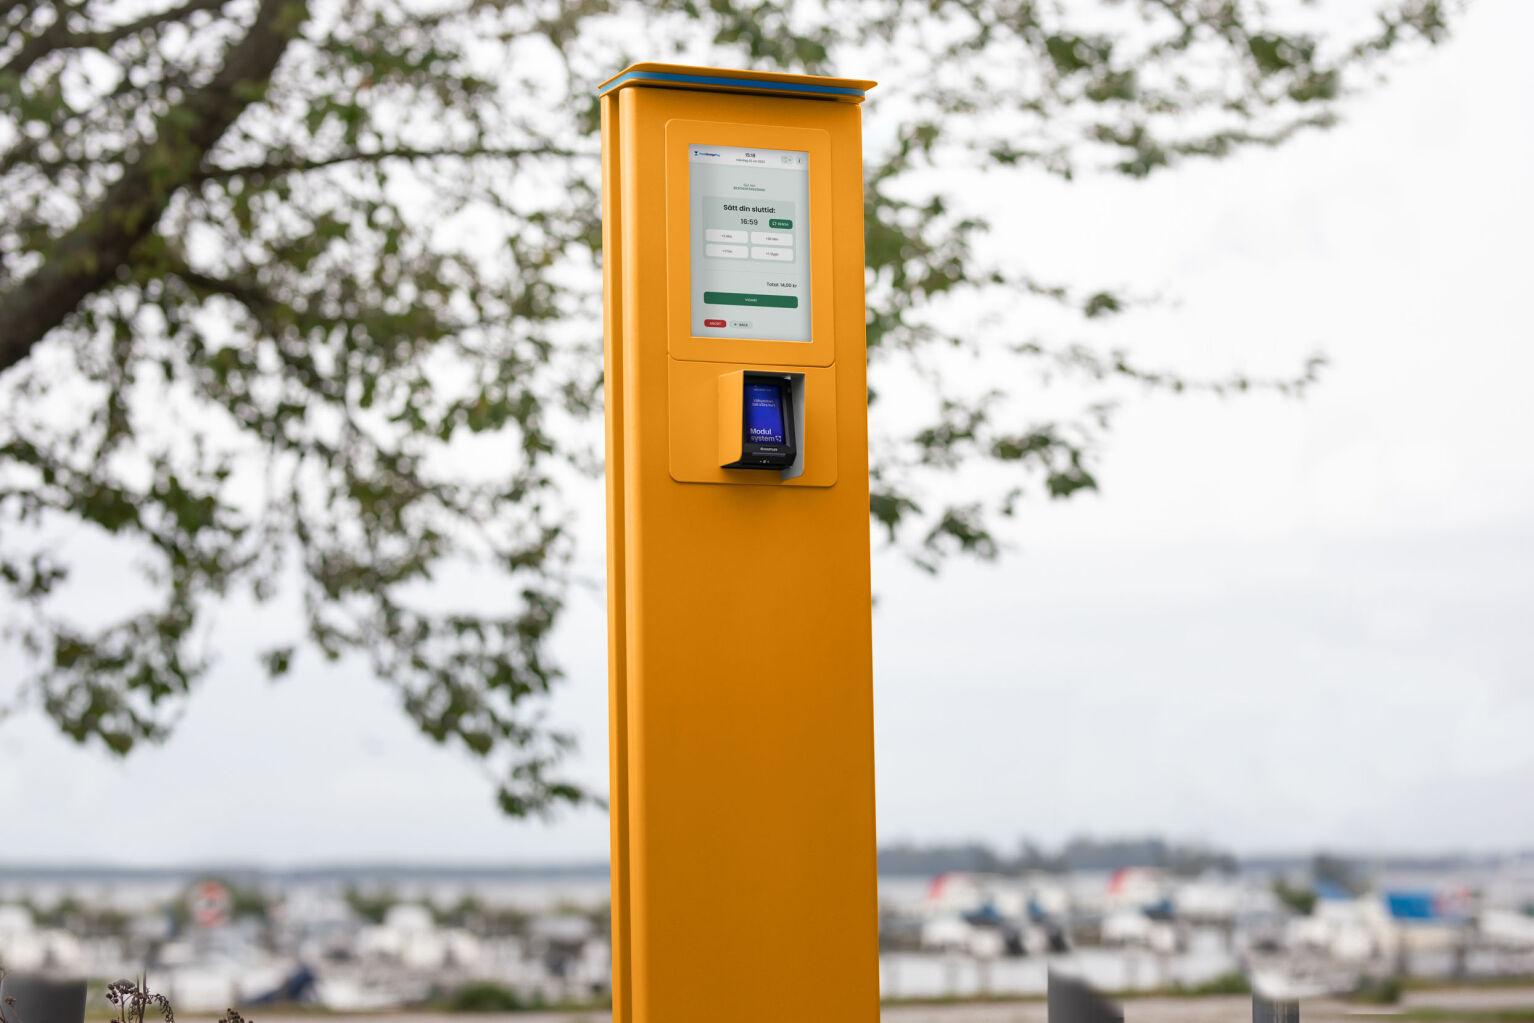 ParkChargePay – Innovative payment solution for Electric car charging in collaboration with Preem